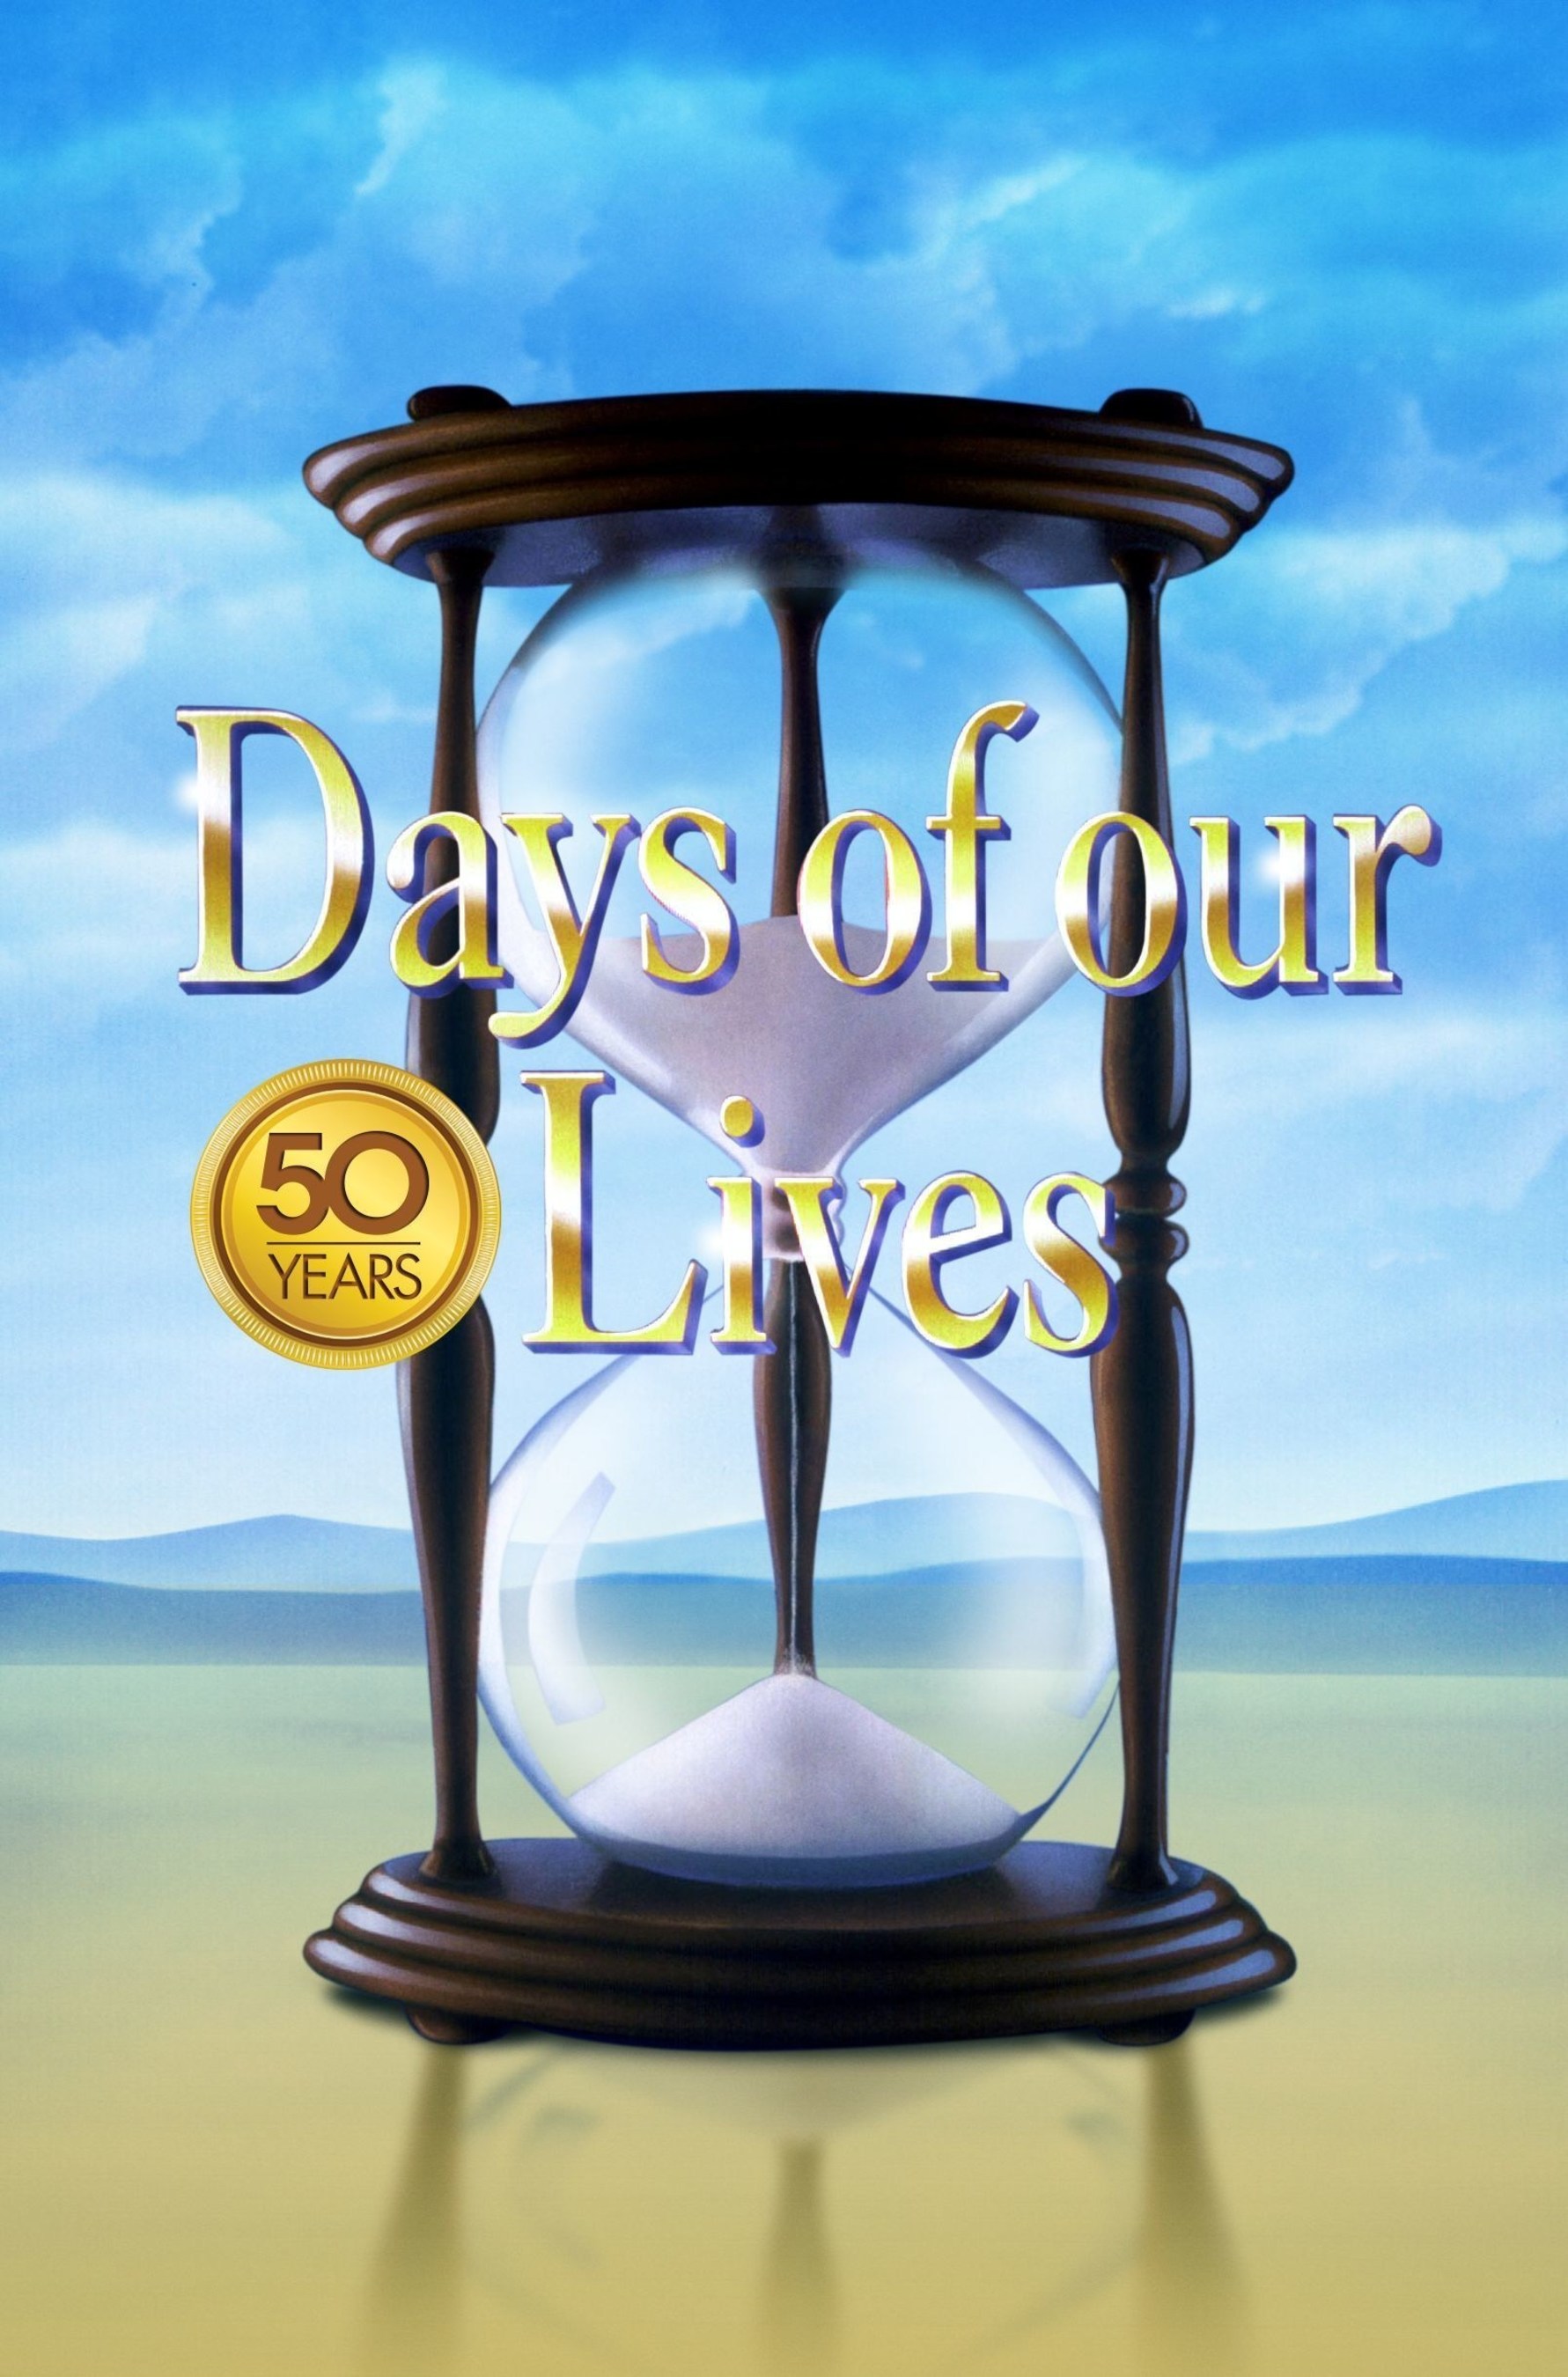 Days of our Lives celebrates 50 years.